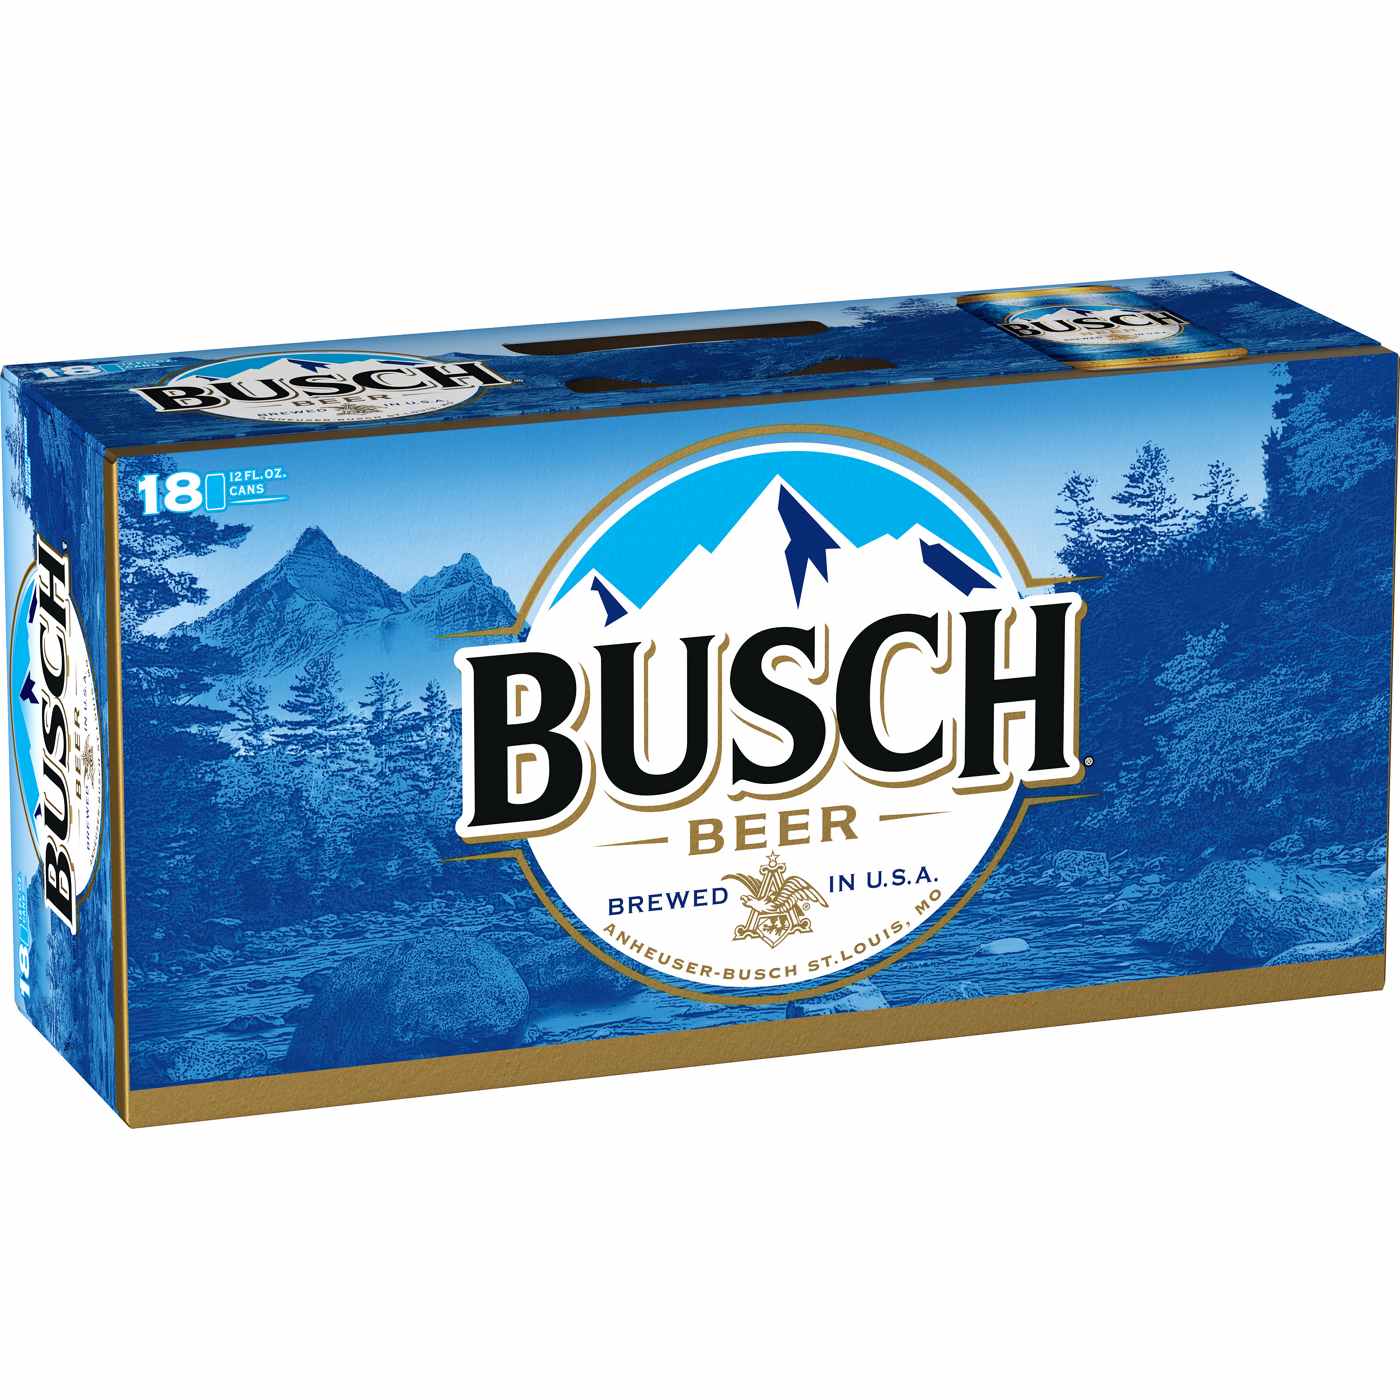 Busch Beer 18 pk Cans; image 1 of 2